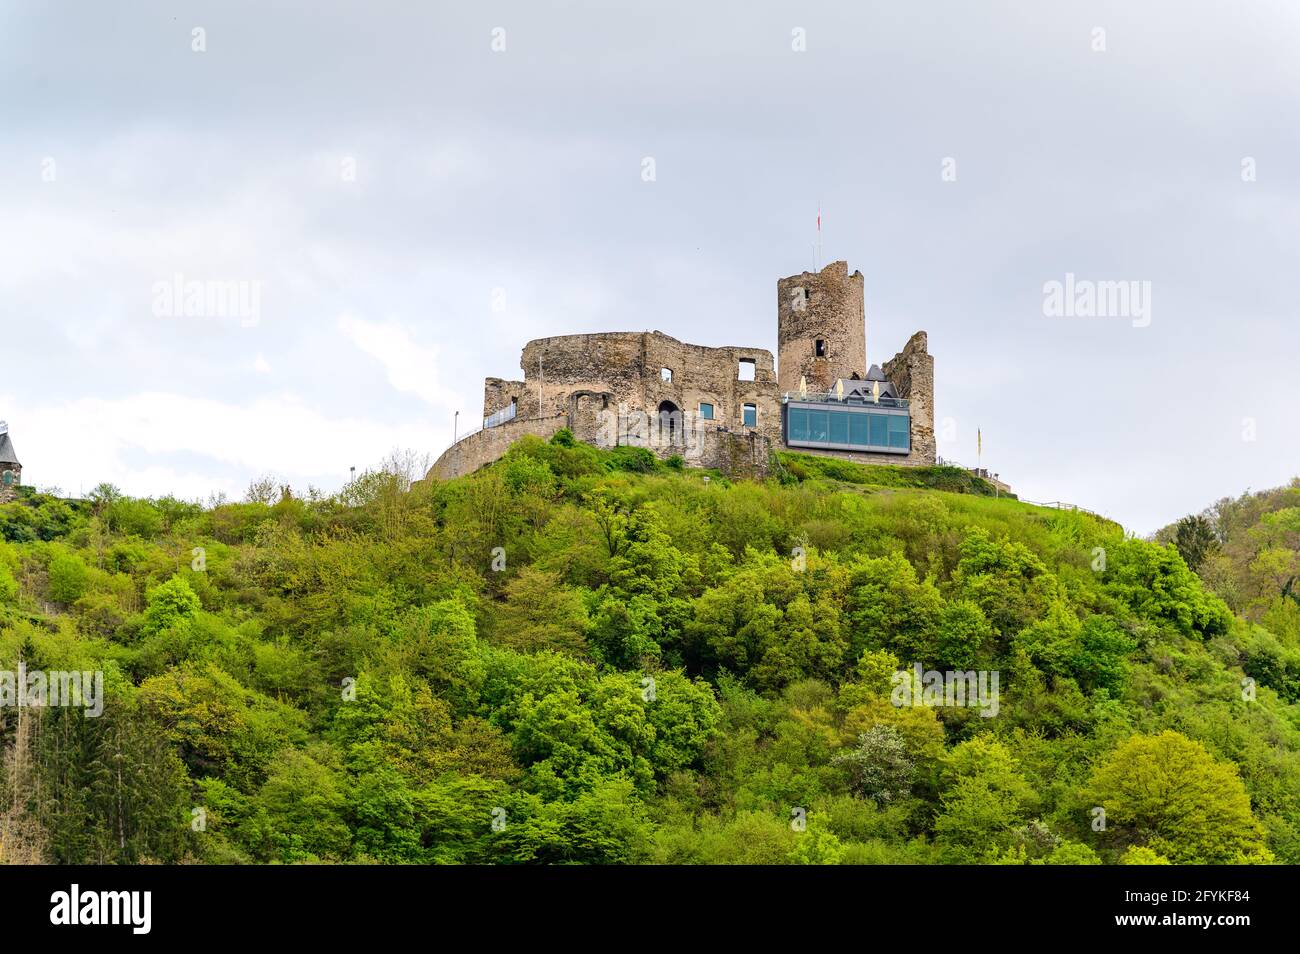 Bernkastel-Kues. Beautiful historical town on romantic Moselle, Mosel river. City view with a castle Burgruine Landshut on a hill. Rhineland-Palatinat Stock Photo